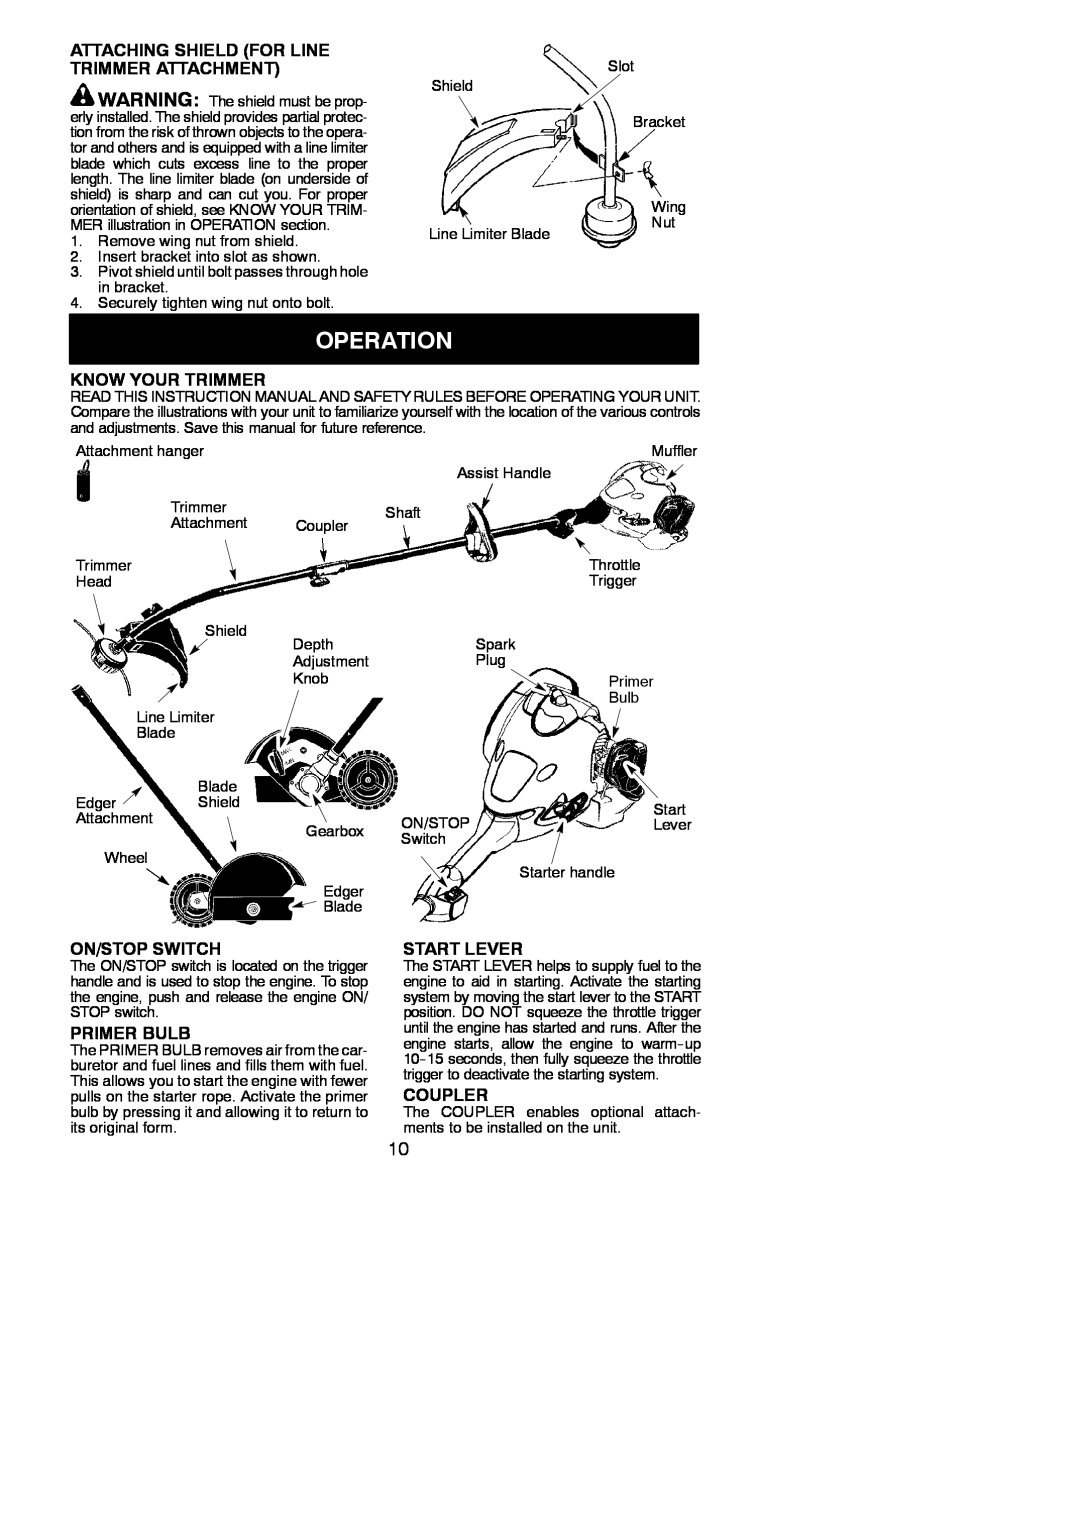 Poulan 952711963 Operation, Attaching Shield For Line Trimmer Attachment, Know Your Trimmer, On/Stop Switch, Primer Bulb 